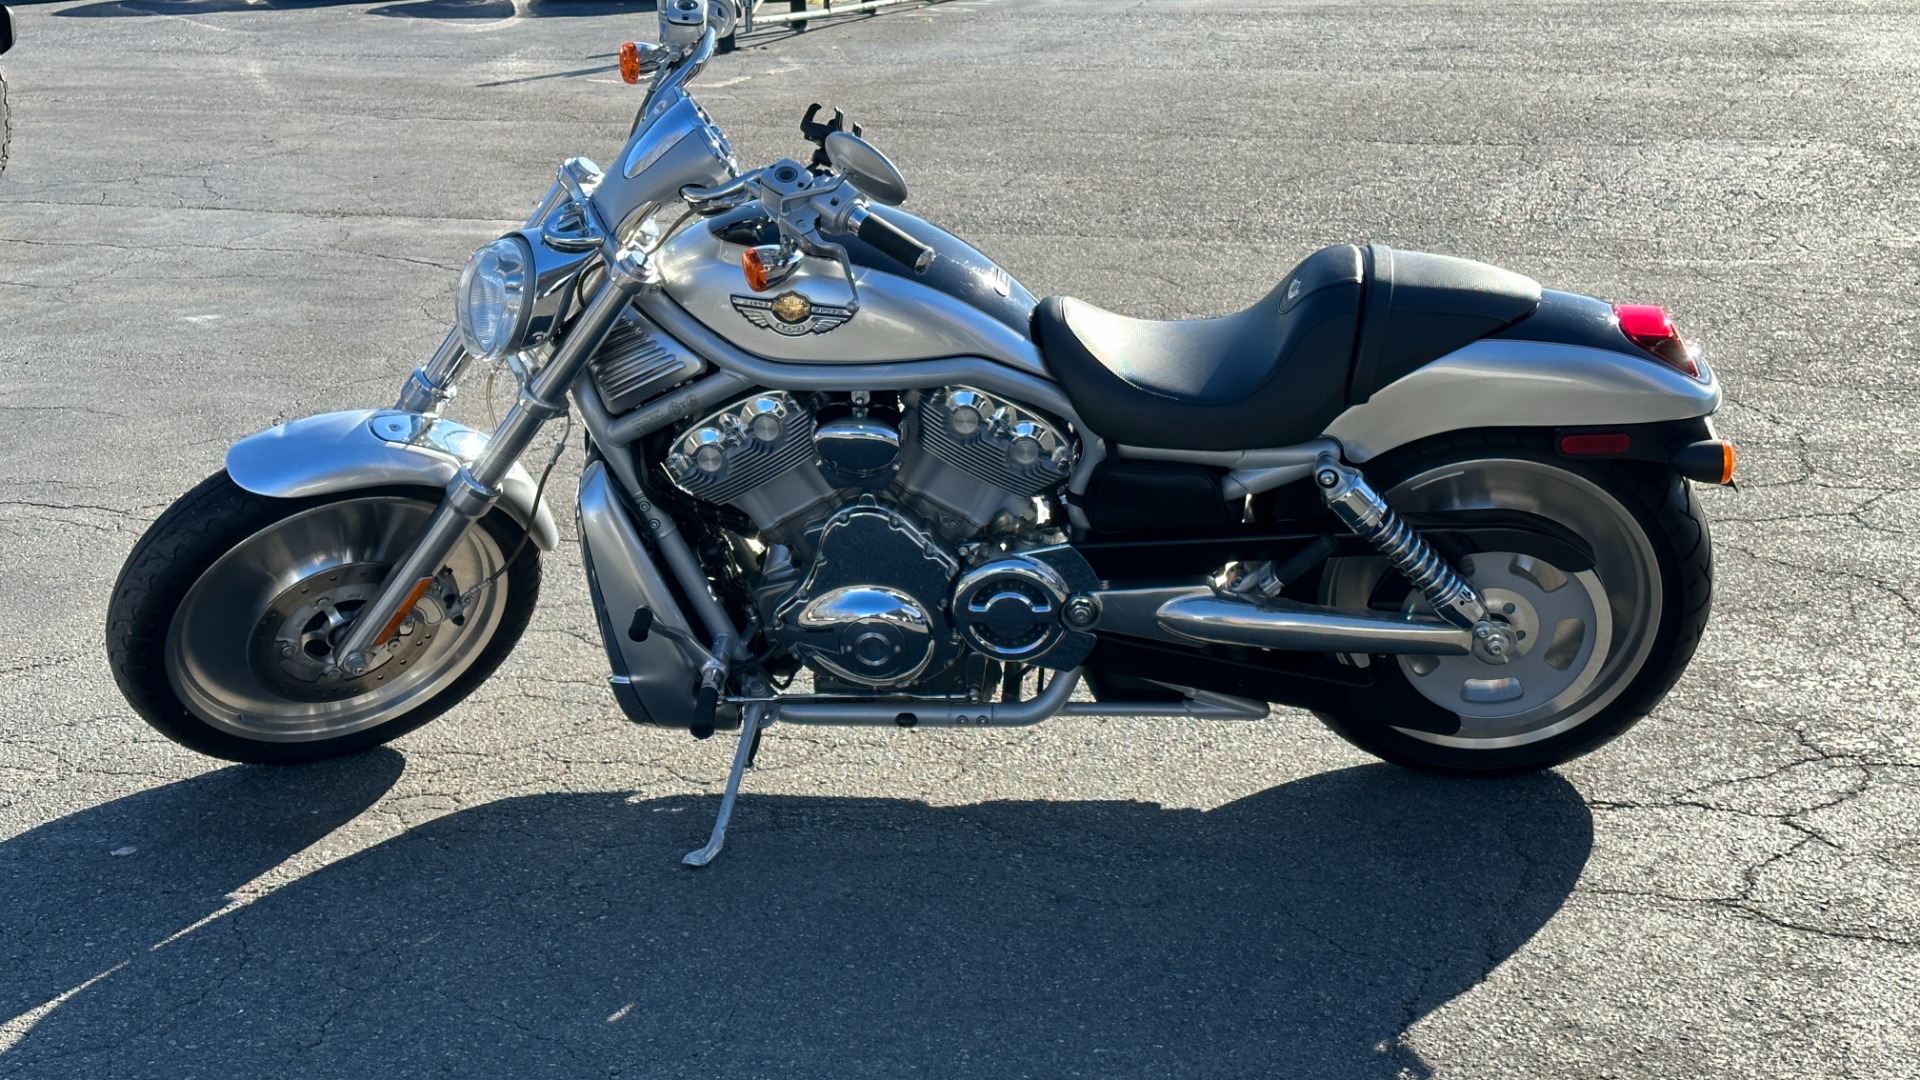 Used 2003 Harley Davidson V Rod ANNIVERSARY EDITION / 1130CC ENGINE / BREMBO BRAKES / VORTEX AIR SCOOPS for sale Sold at Formula Imports in Charlotte NC 28227 5